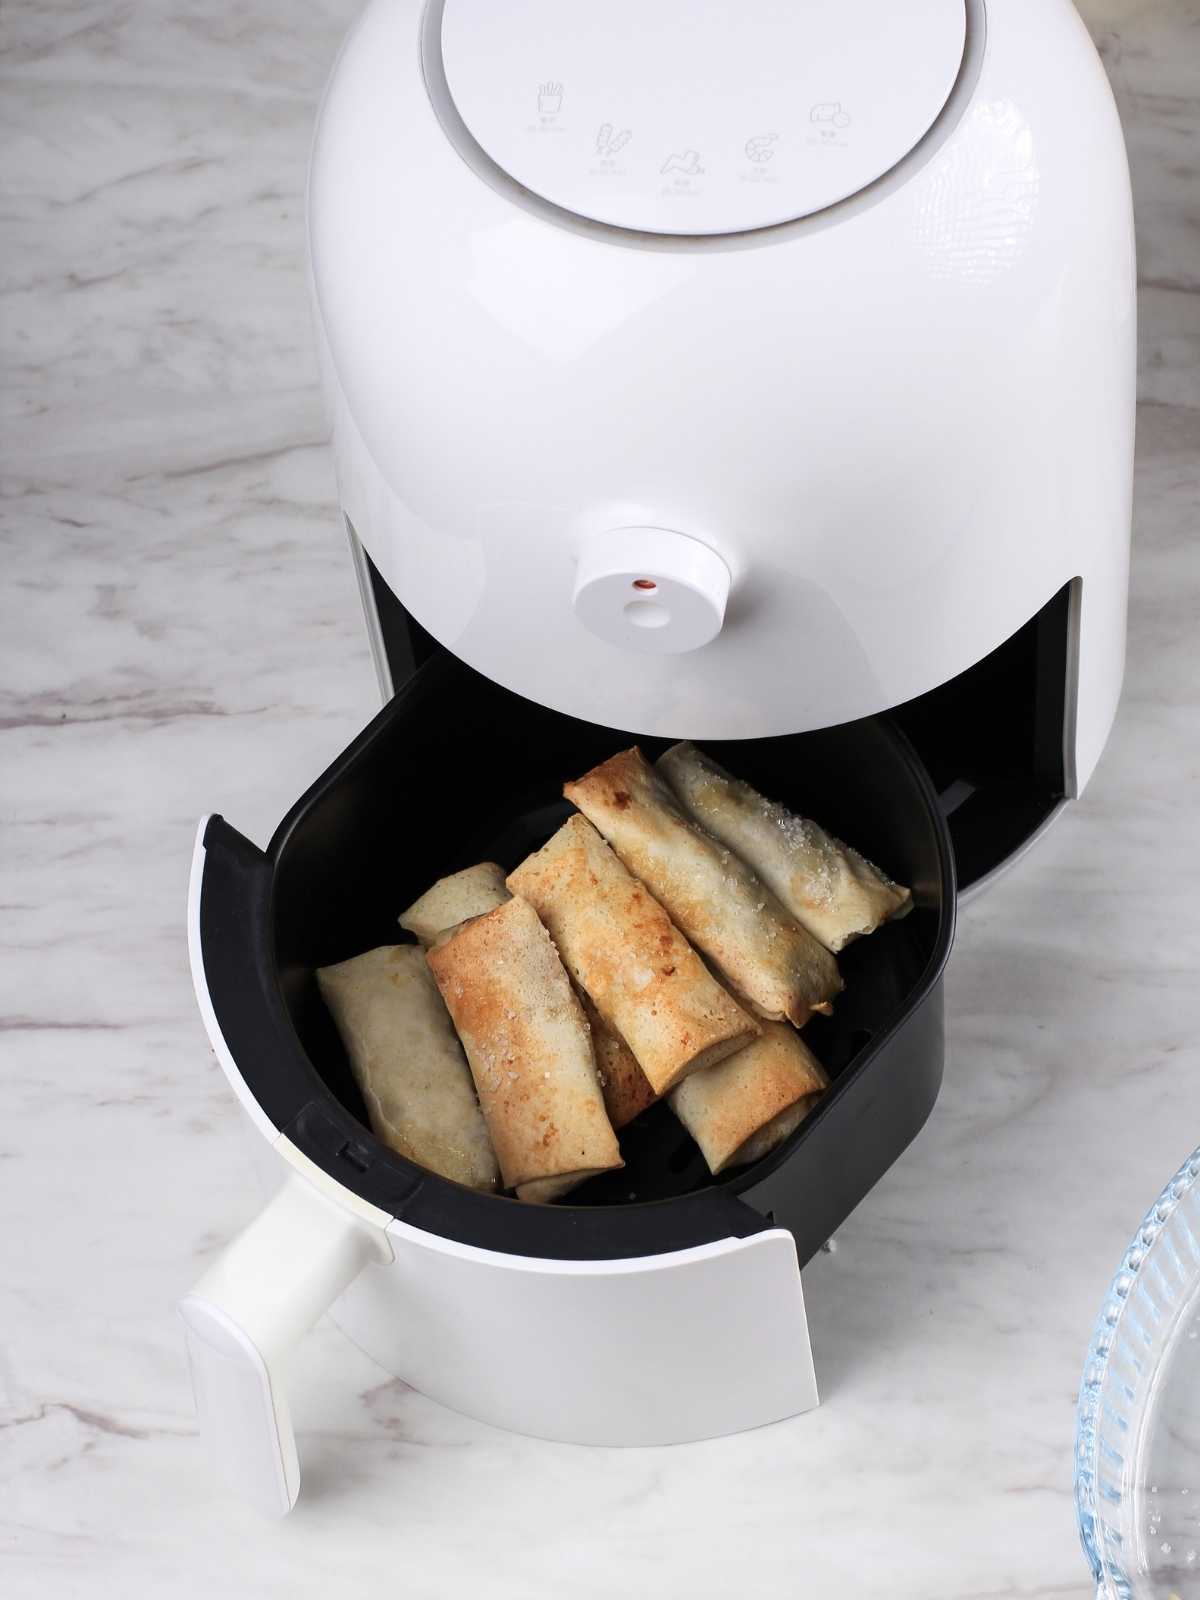 Air fryer open with spring rolls sitting in the basket.